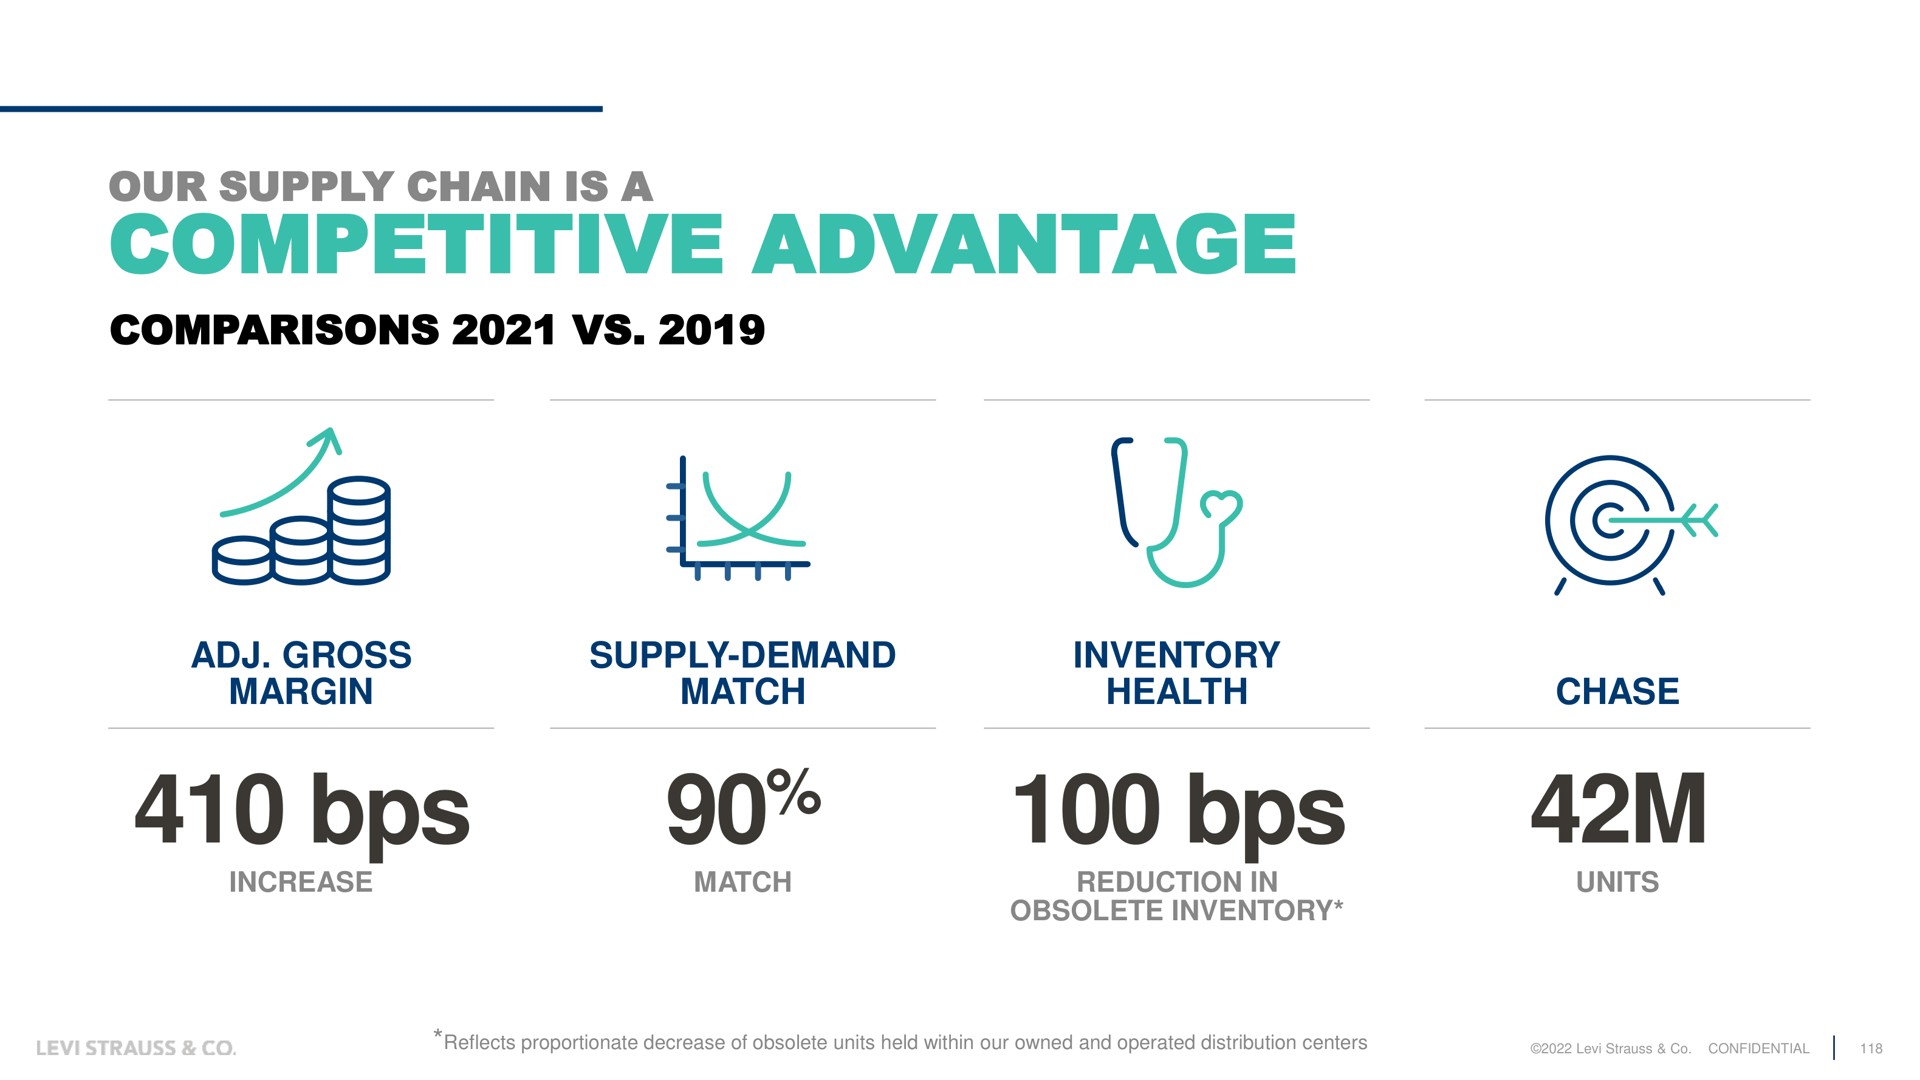 our supply chain is a competitive advantage comparisons gross margin supply demand match inventory health chase | Levi Strauss